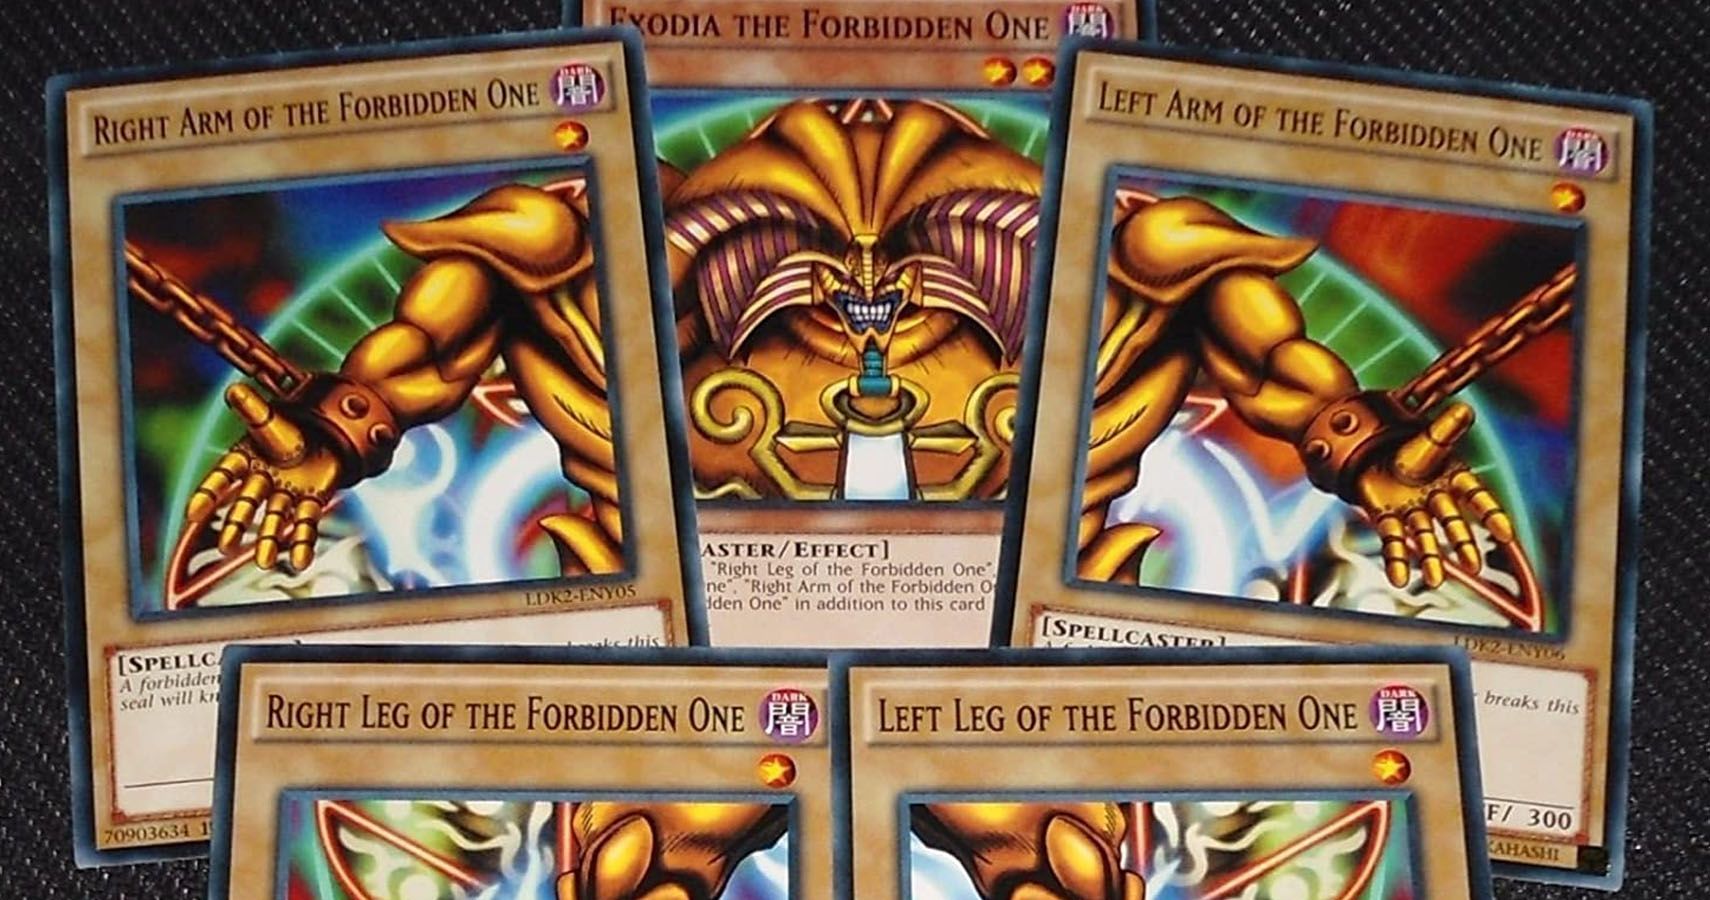 10-controversial-yu-gi-oh-cards-that-were-censored-outside-japan